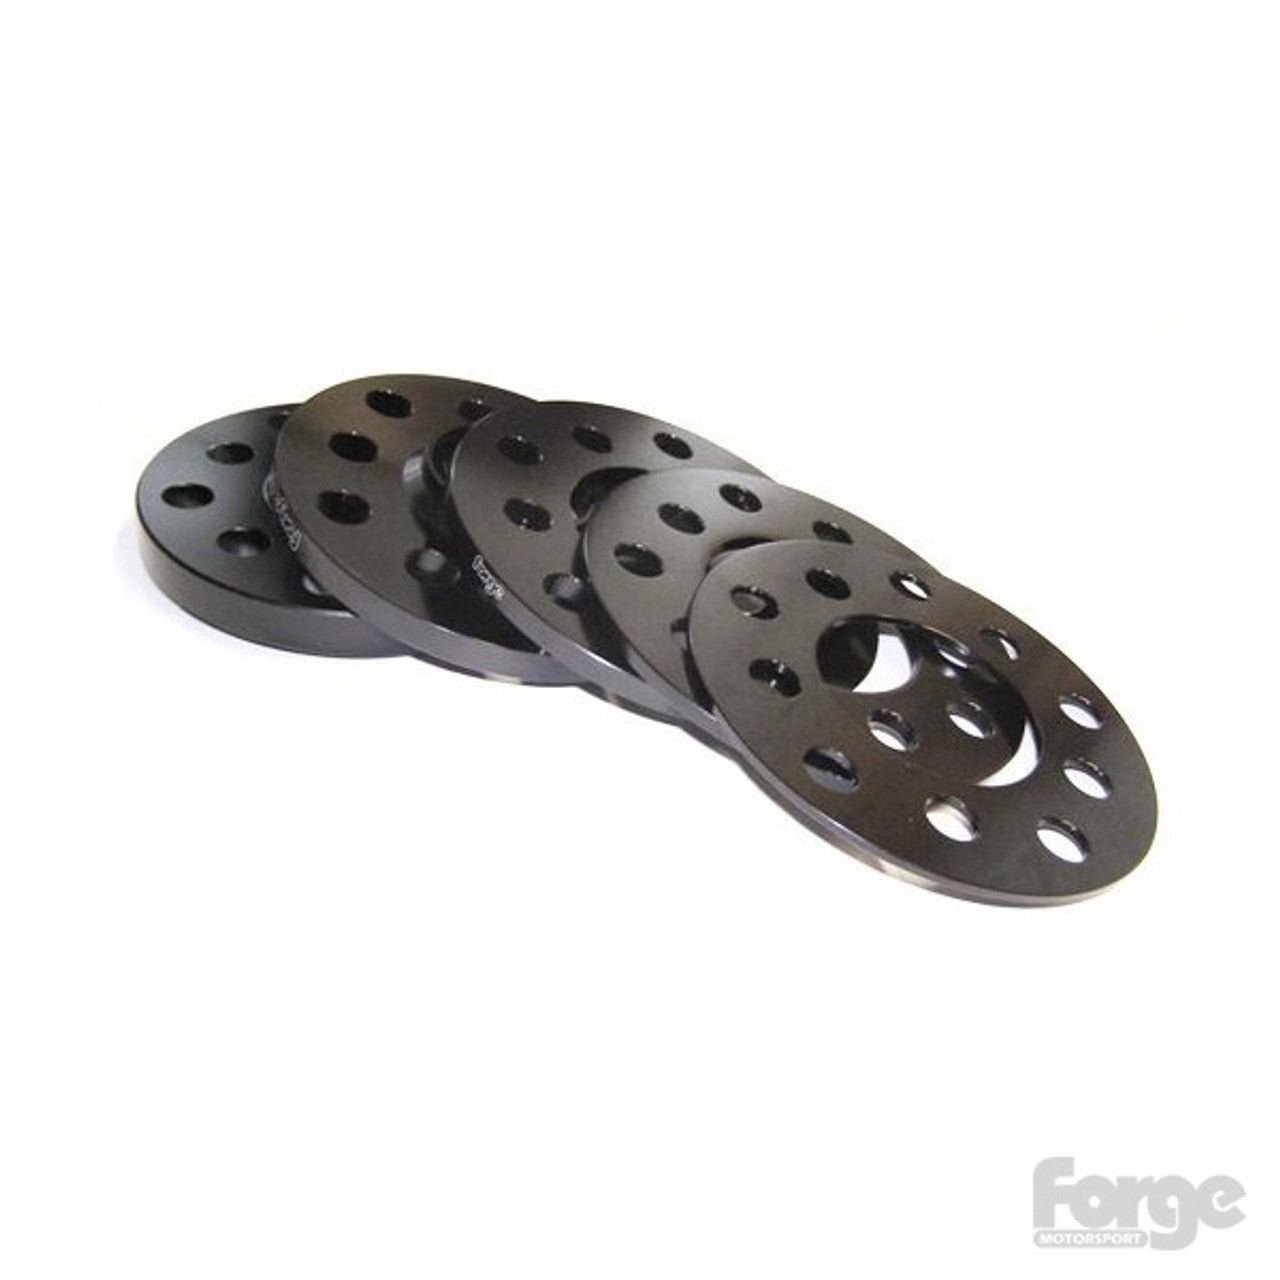 Forge 11mm (per side) hubcentric